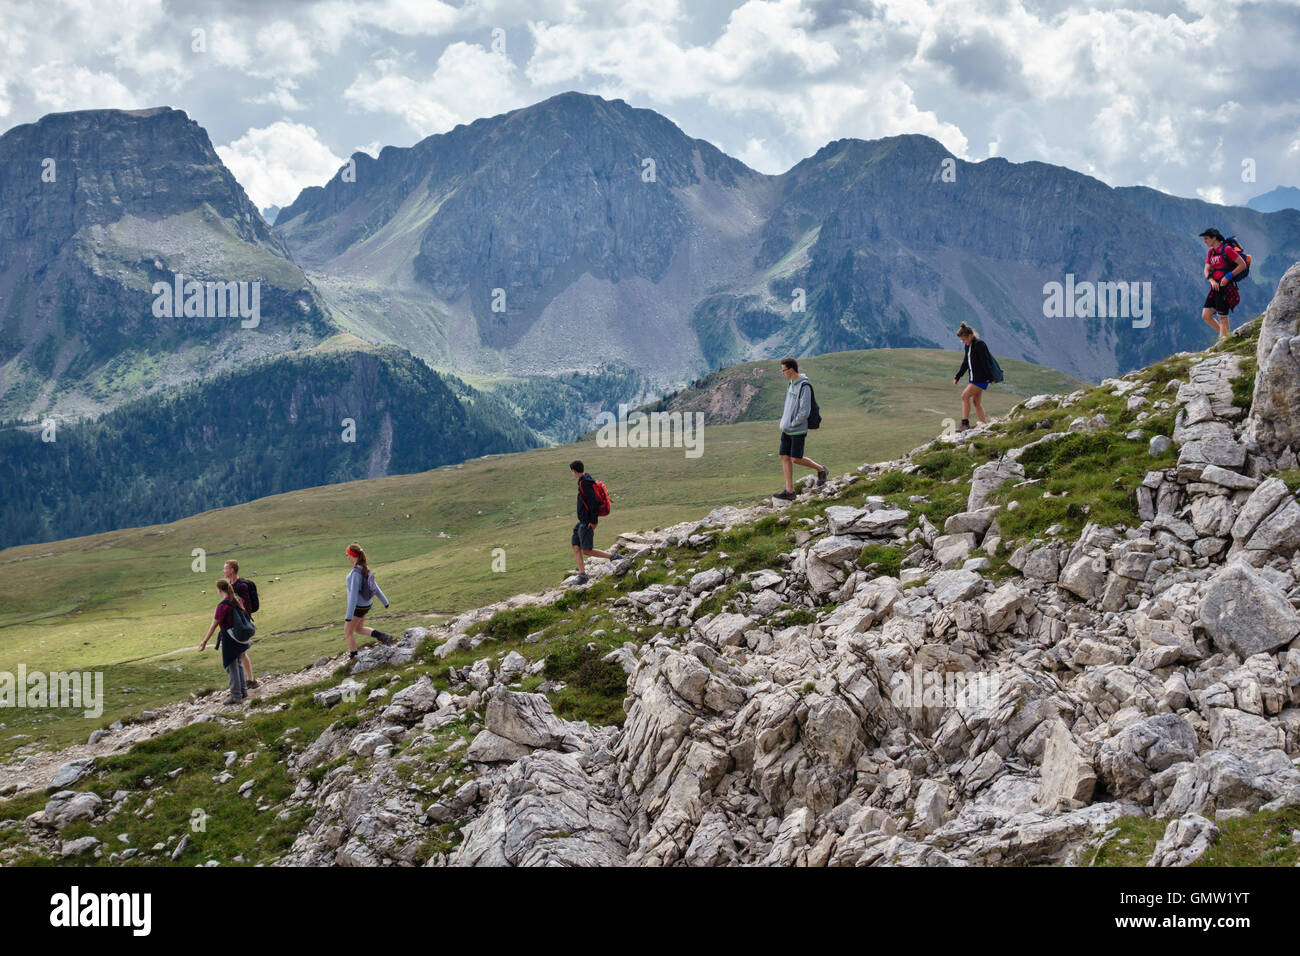 The Dolomites, Trentino, northern Italy. Teenagers walking down from the Rifugio Passo delle Selle above Passo San Pellegrino Stock Photo